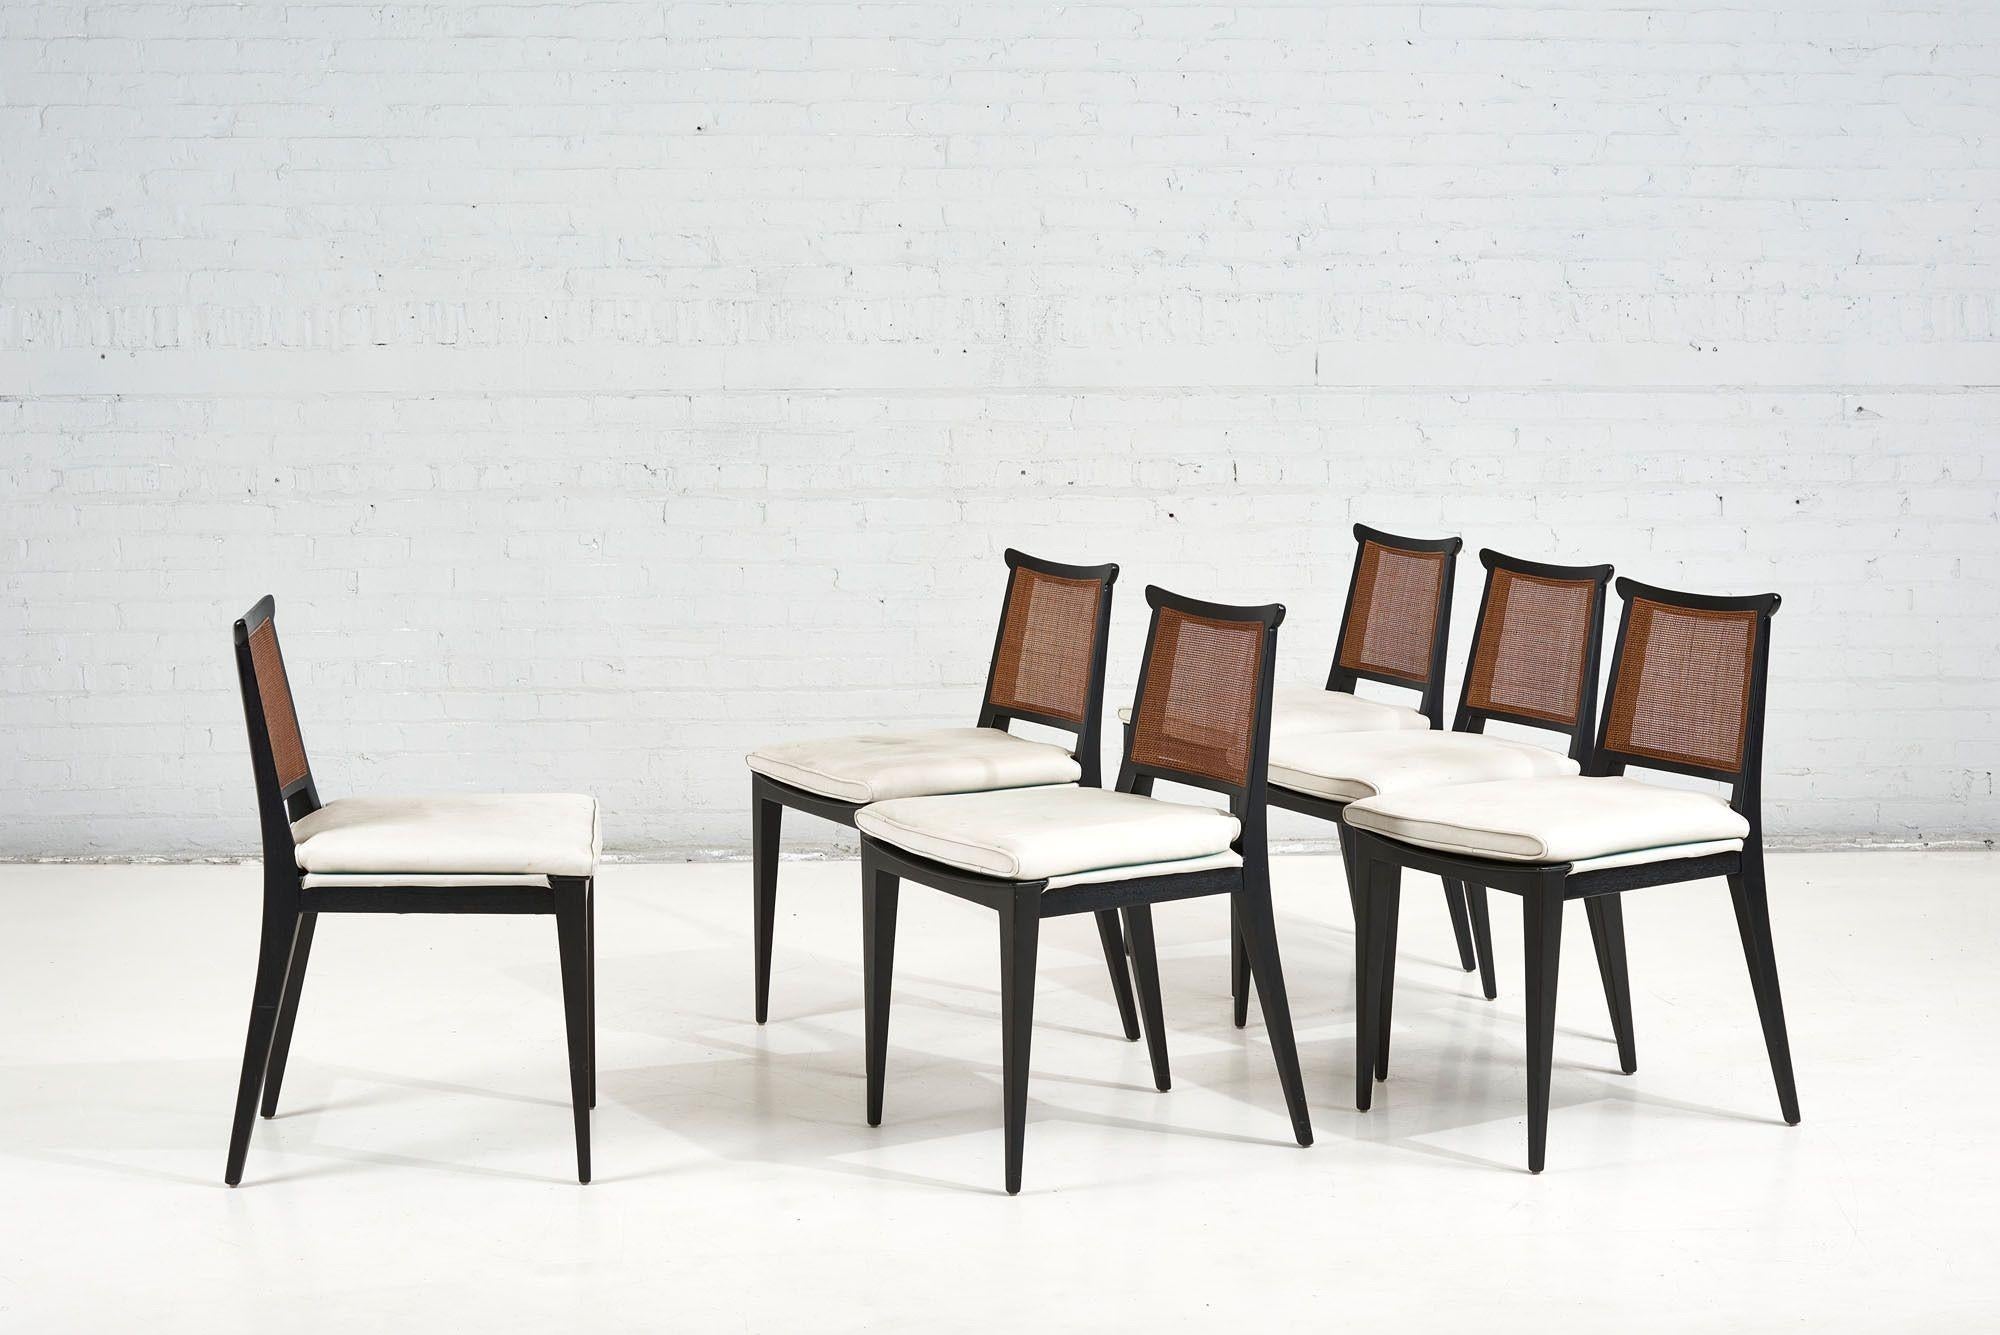 Cane 8 Dining Chairs by Edward Wormley for Dunbar, 1960